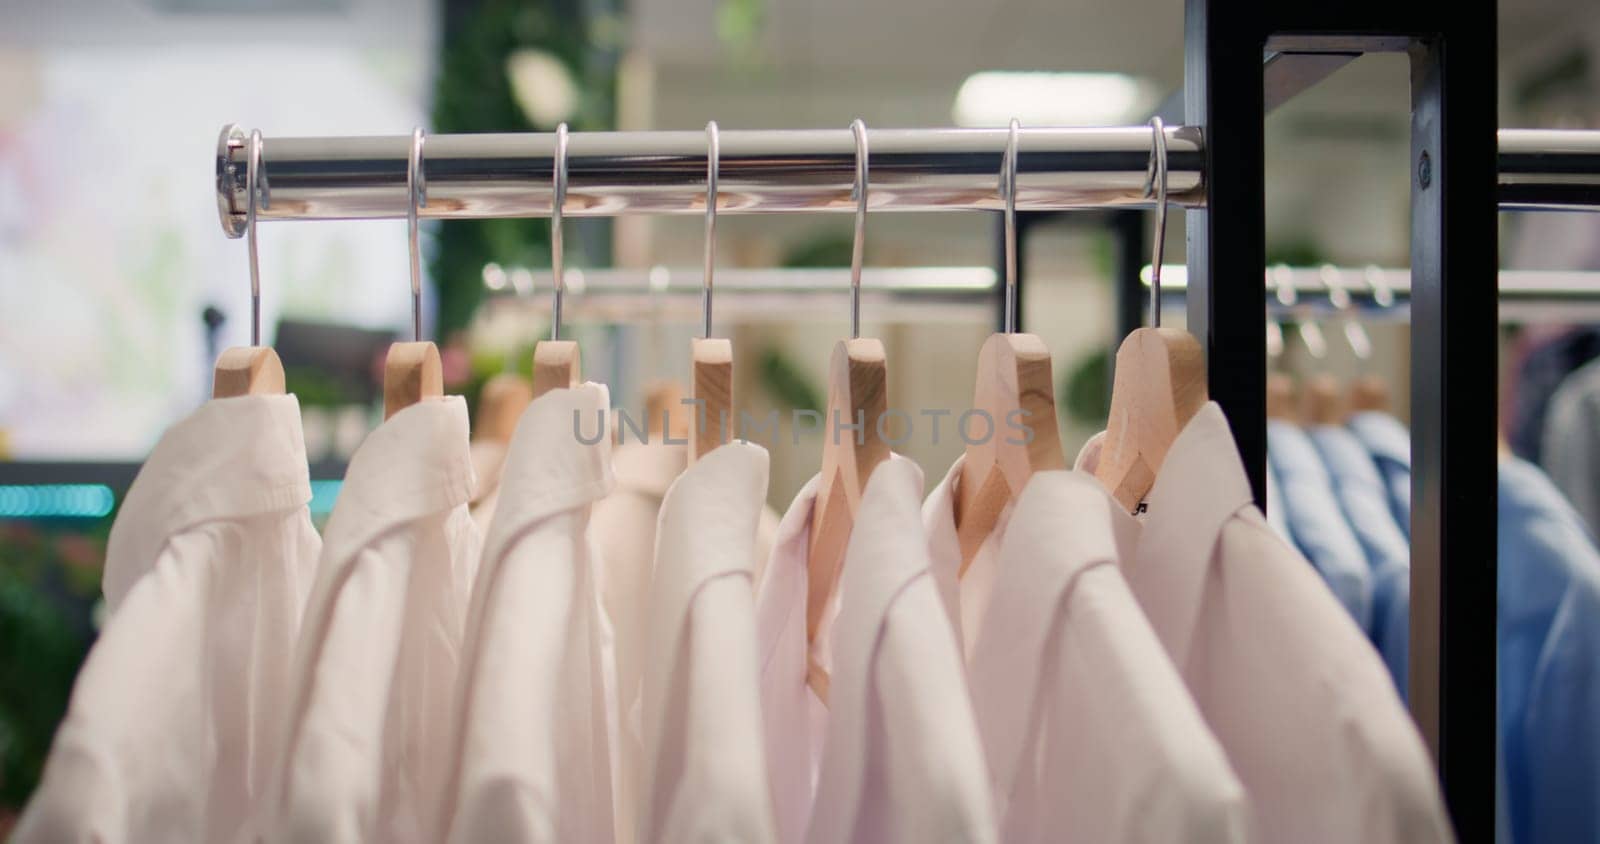 Close up shot of high quality garments in premium clothing store. Elegant formalwear white shirts in empty newly opened luxurious fashion boutique awaiting customers, jib down shot